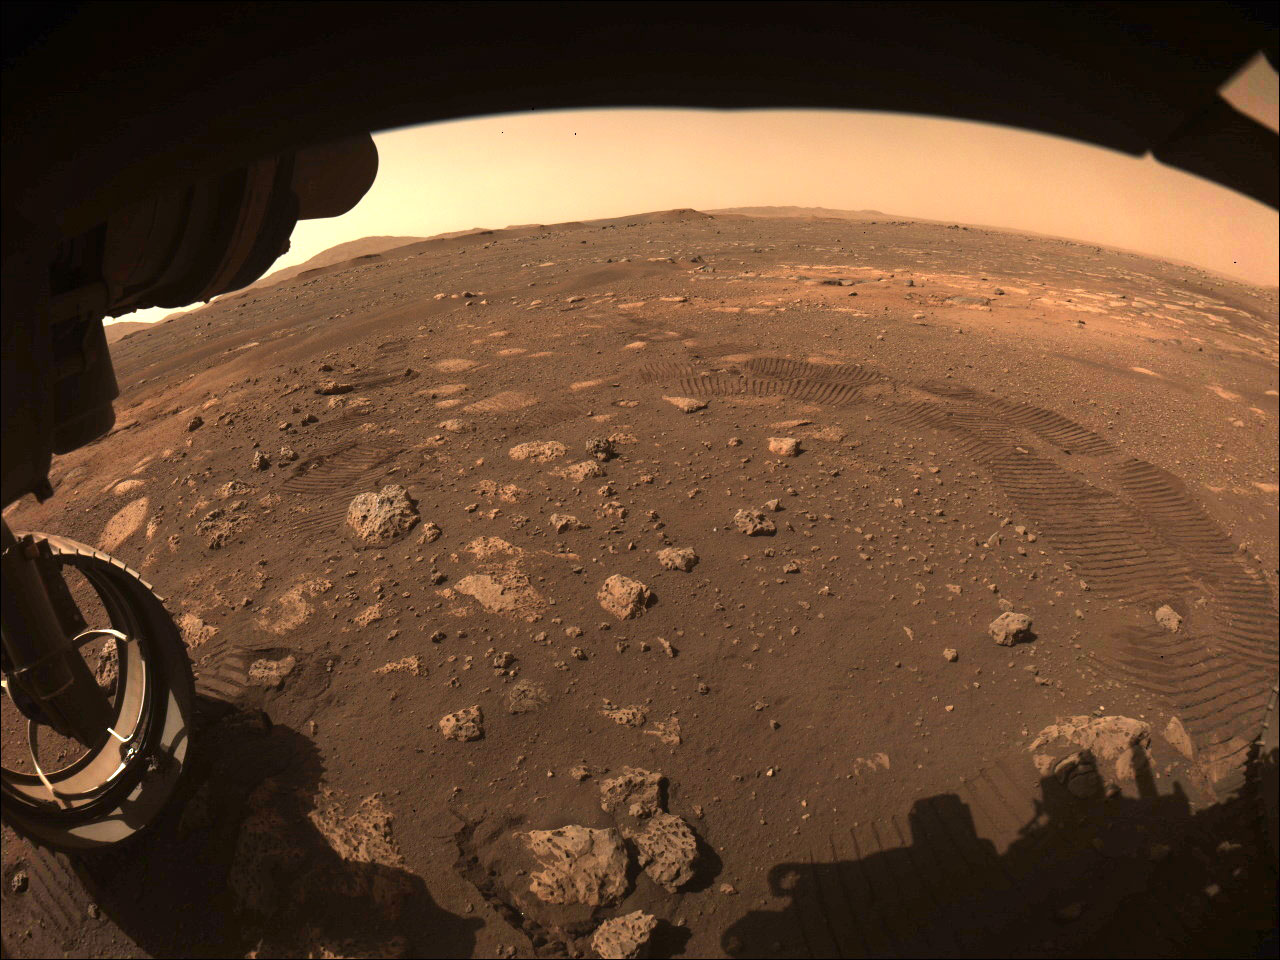 This image was captured while NASA’s Perseverance rover drove on Mars for the first time on March 4, 2021.